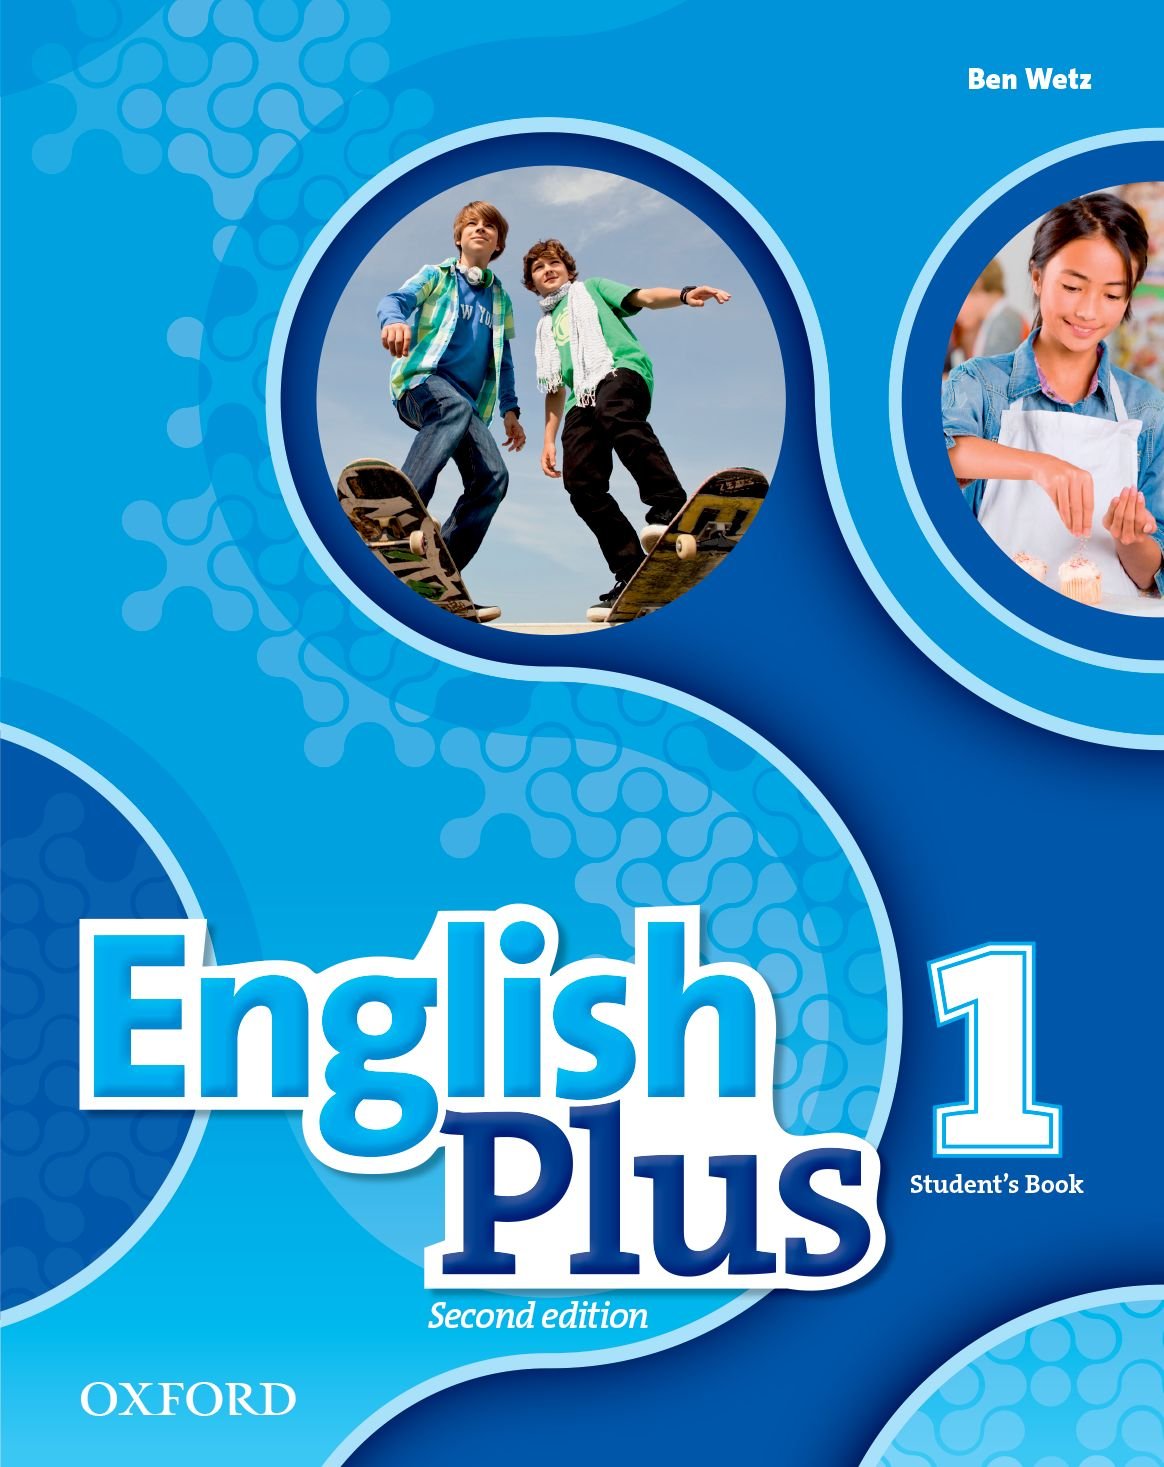 ENGLISH PLUS 1 2nd EDITION Student's Book